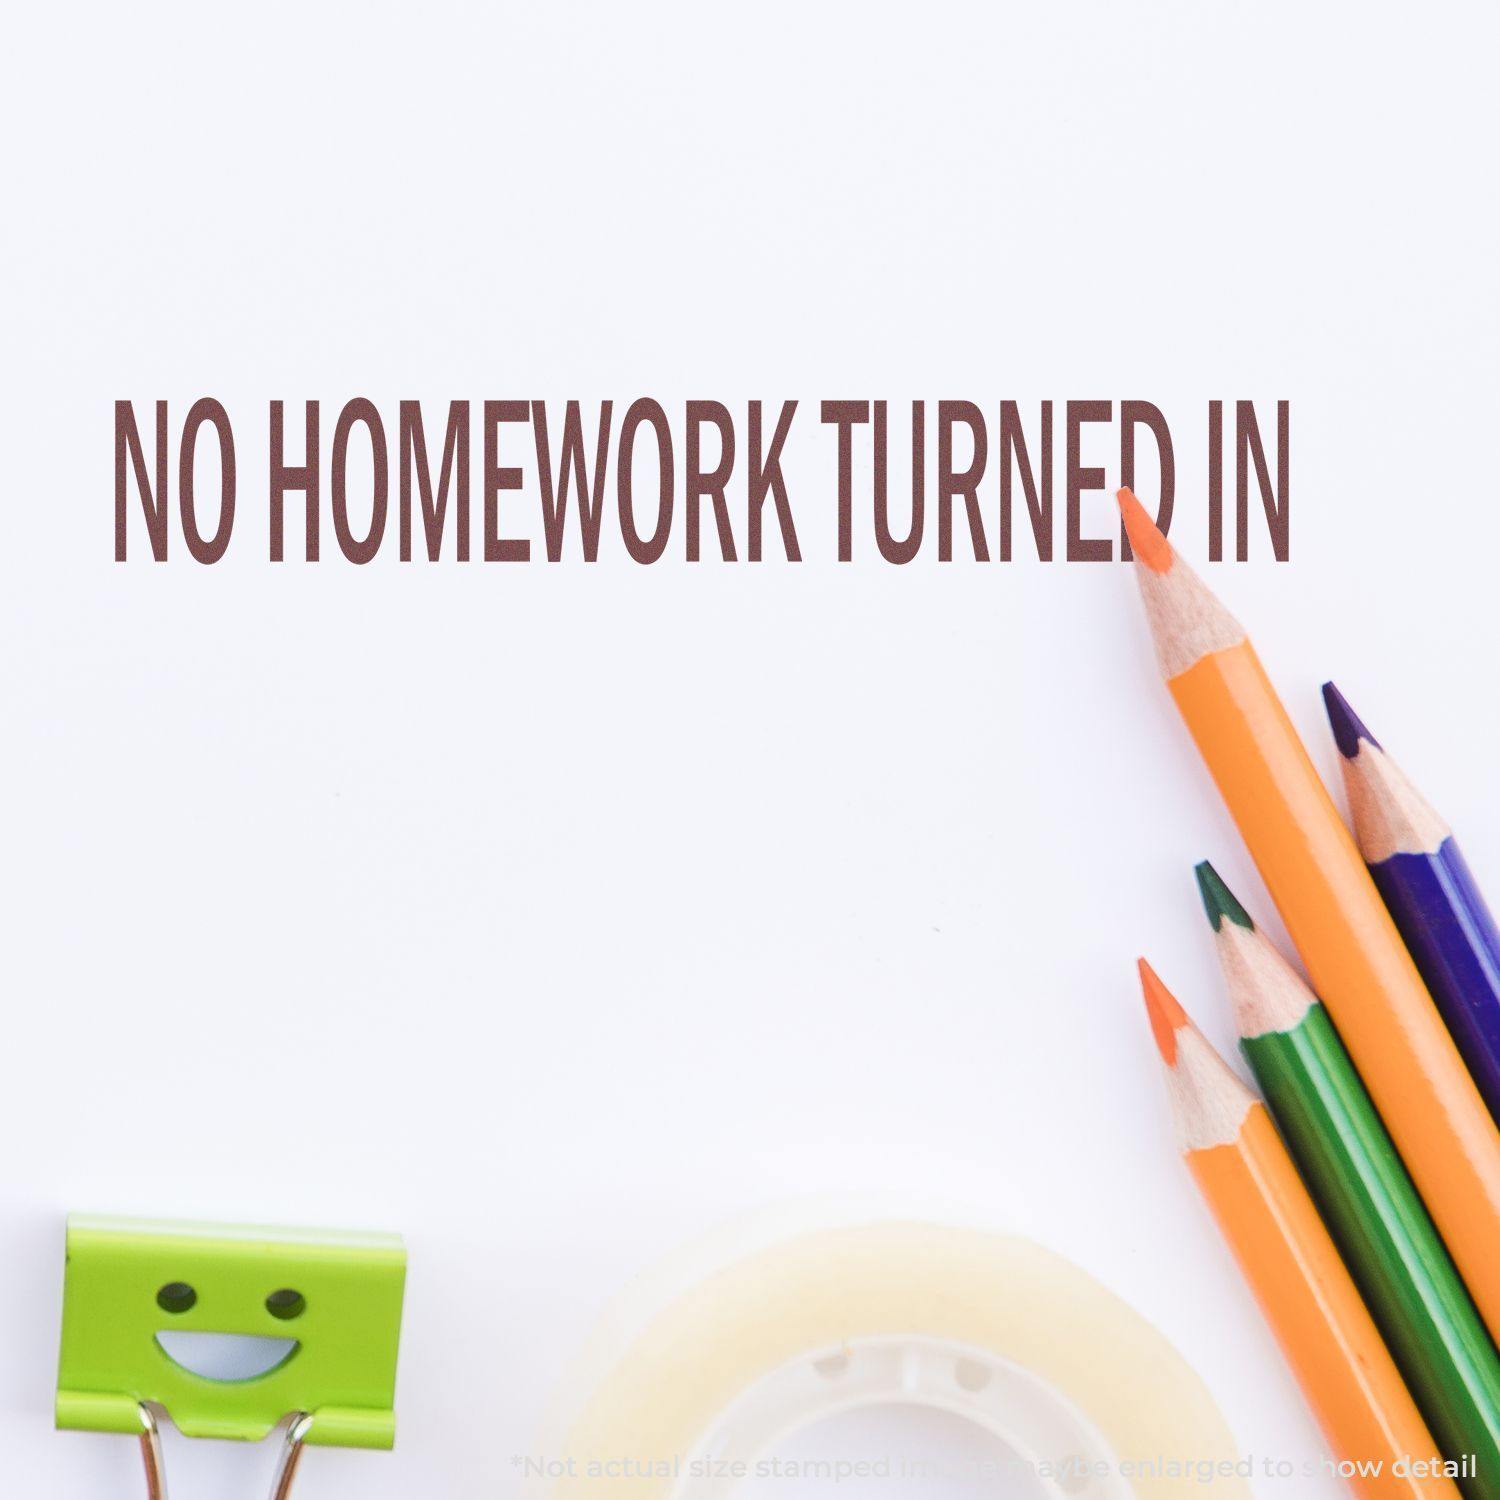 A stock office rubber stamp with a stamped image showing how the text "NO HOMEWORK TURNED IN" is displayed after stamping.